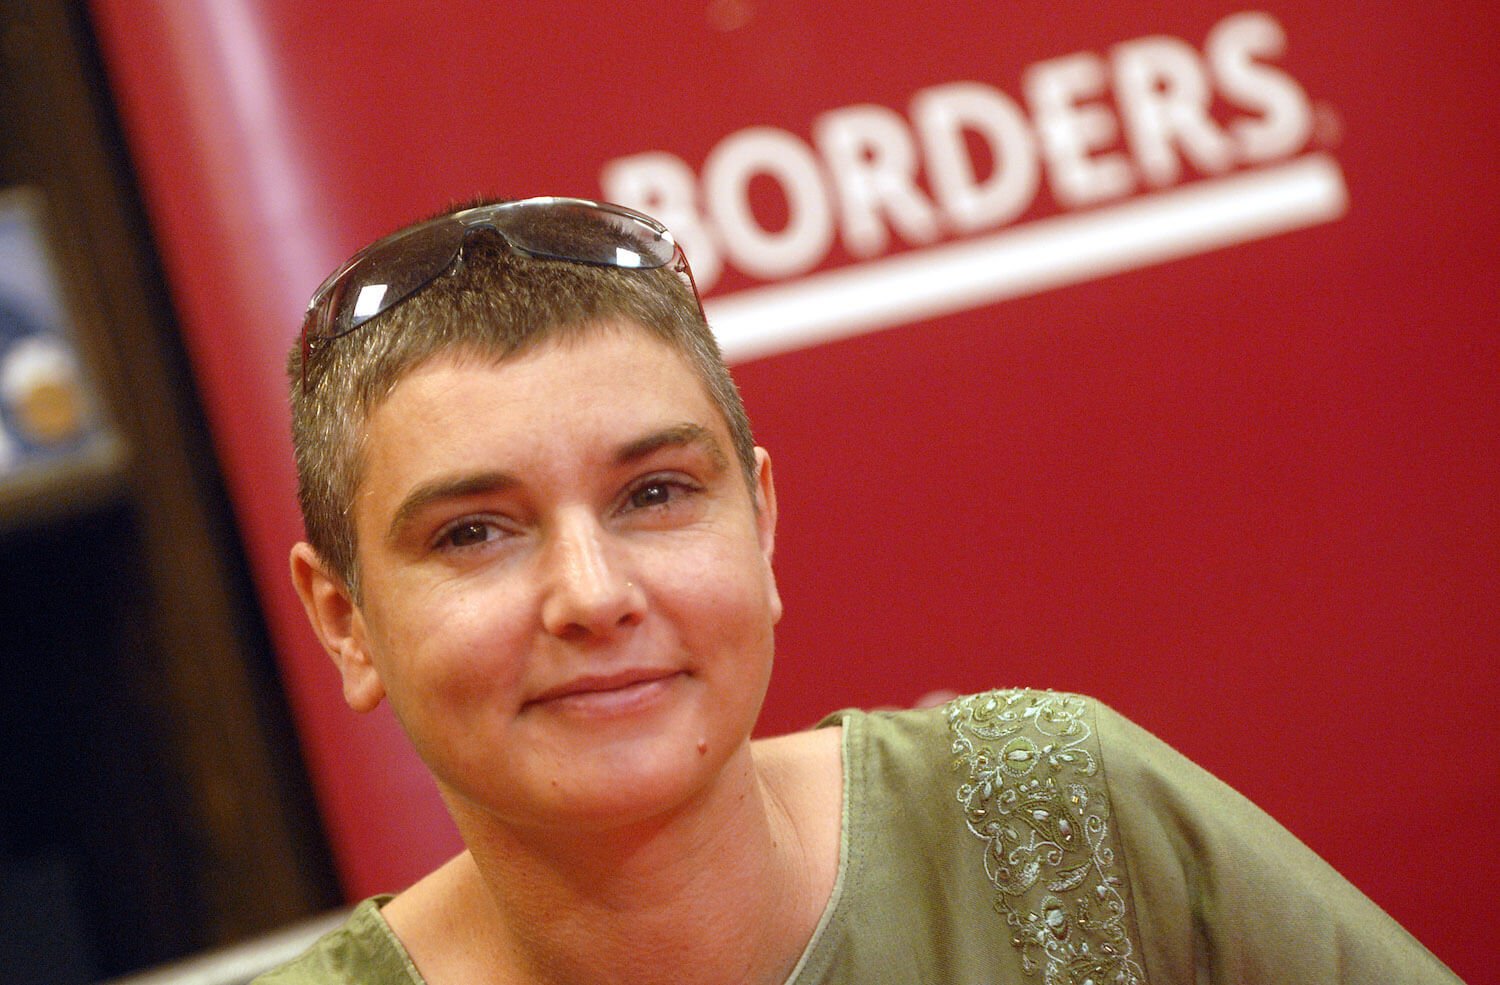 A close-up of Sinead O'Connor against a red 'Borders' background